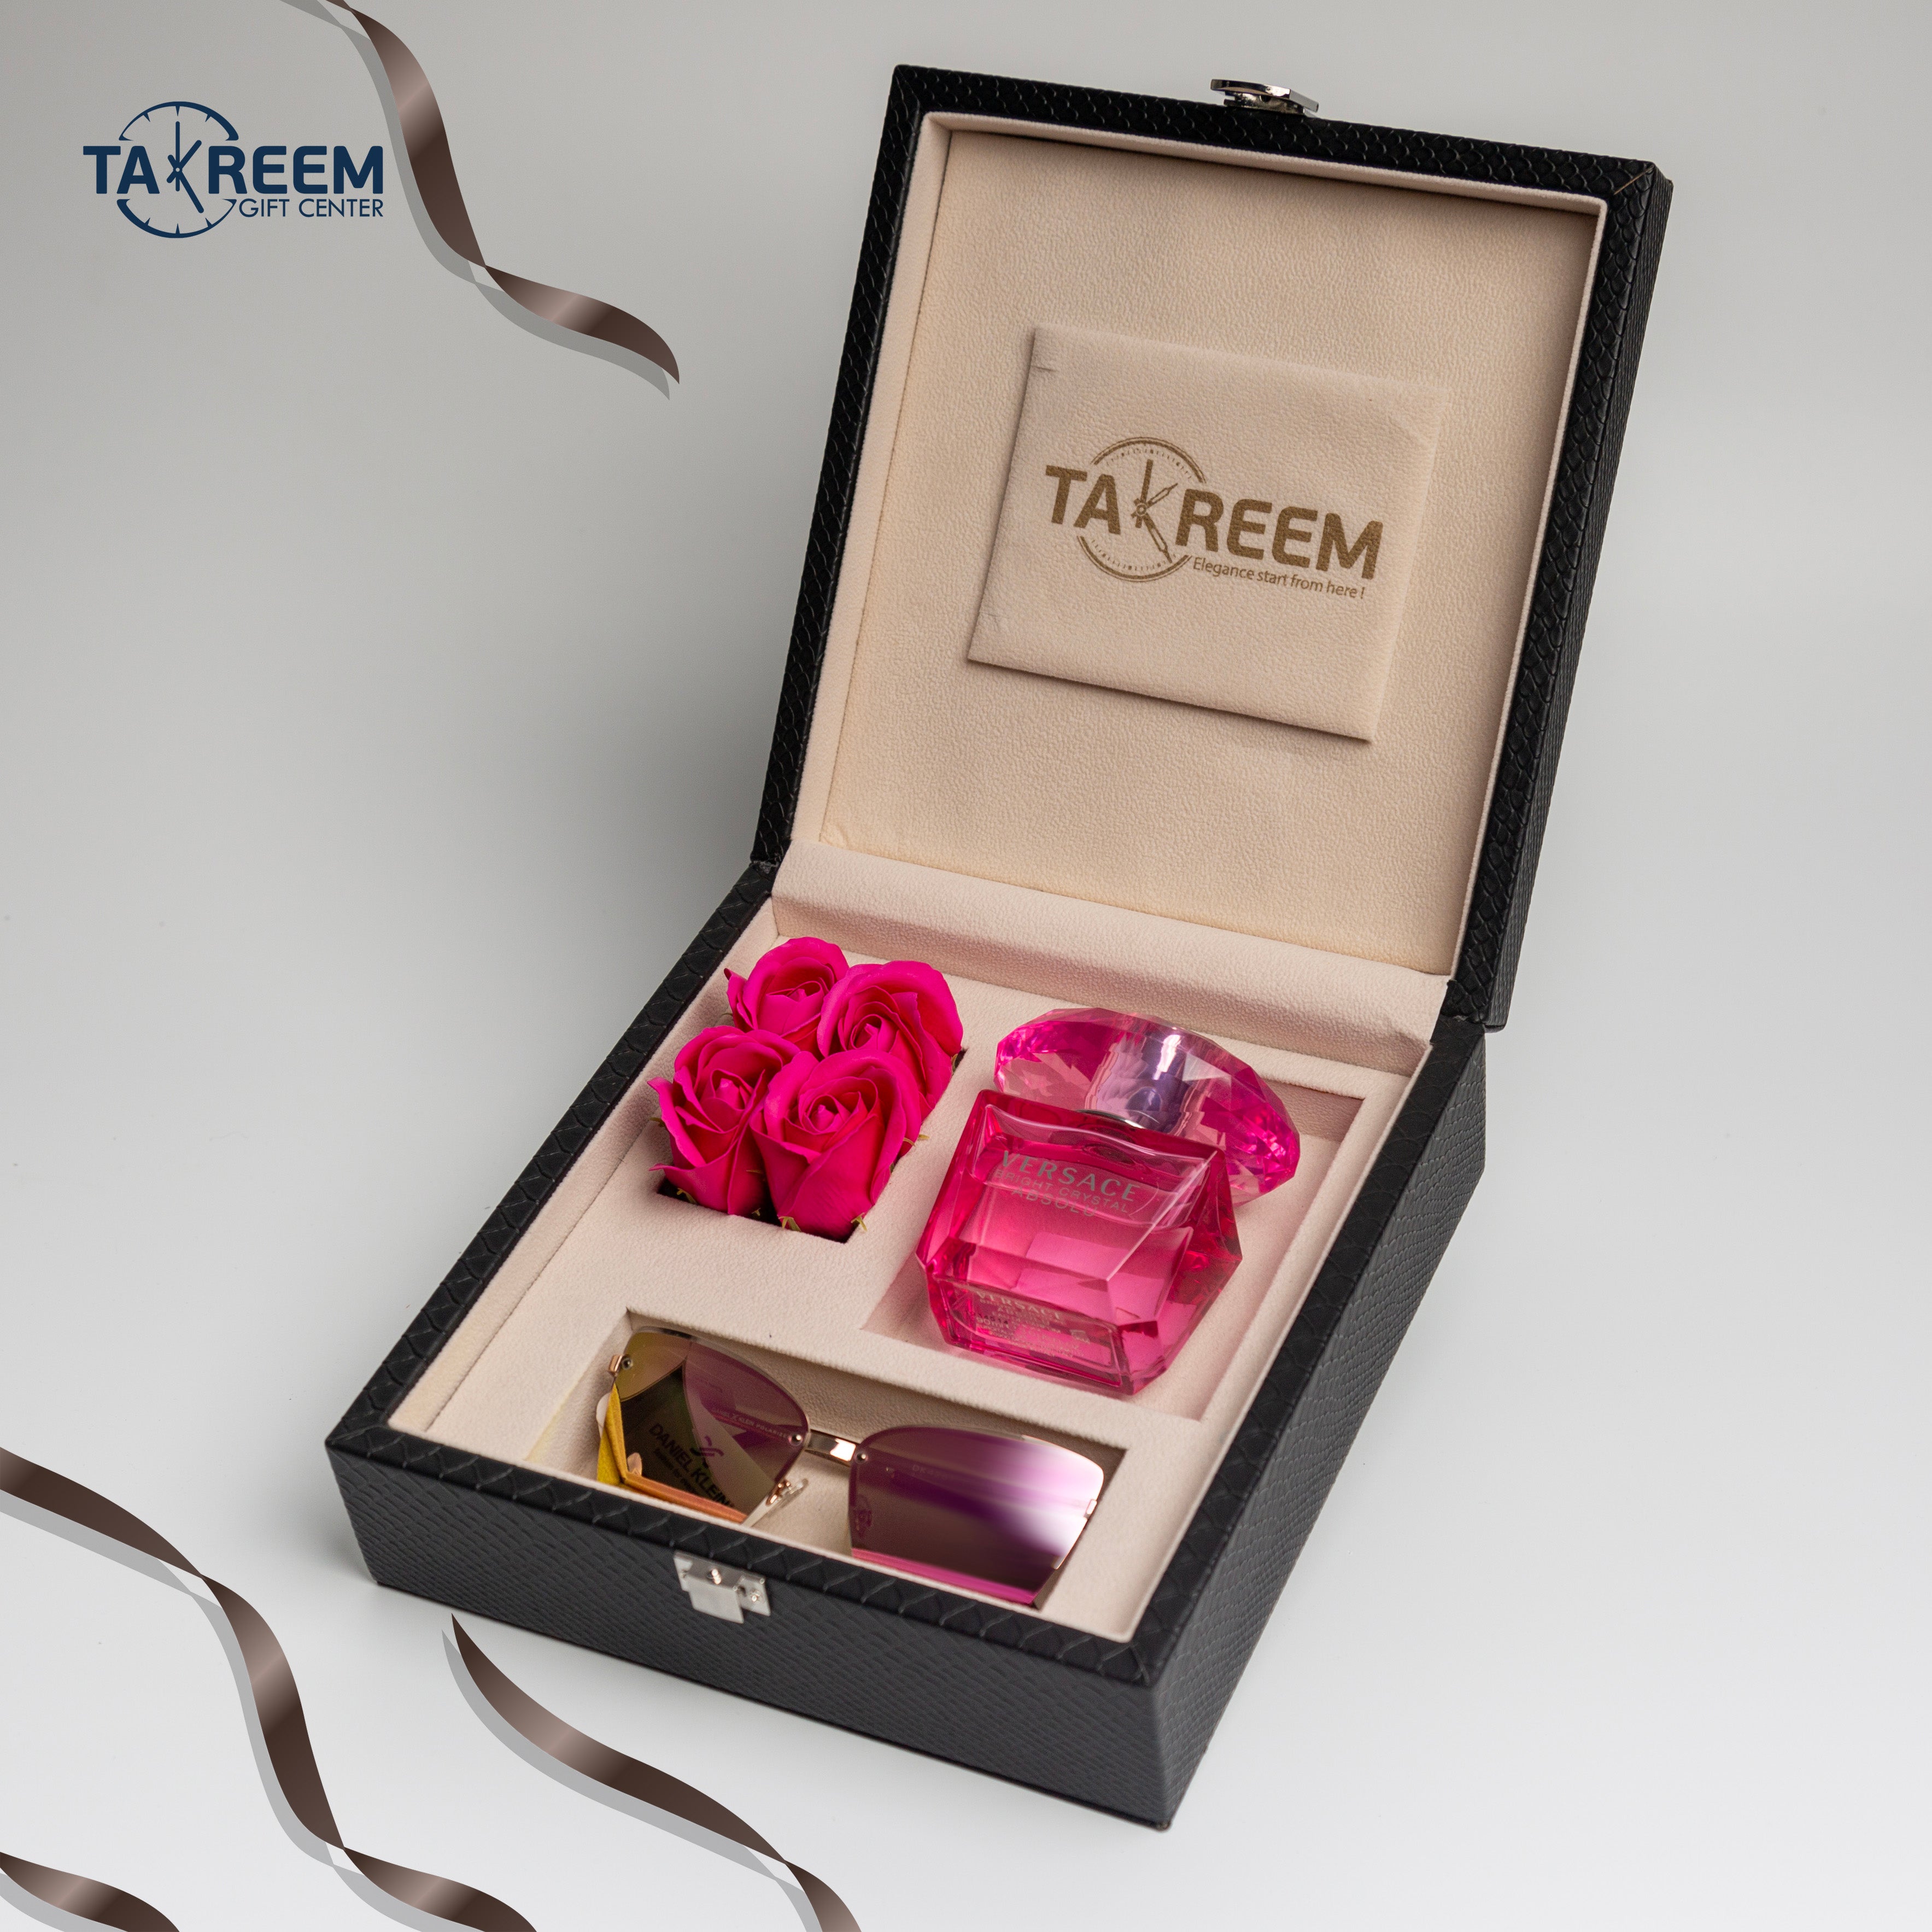 Gift Boxes By Takreem Gifts Center